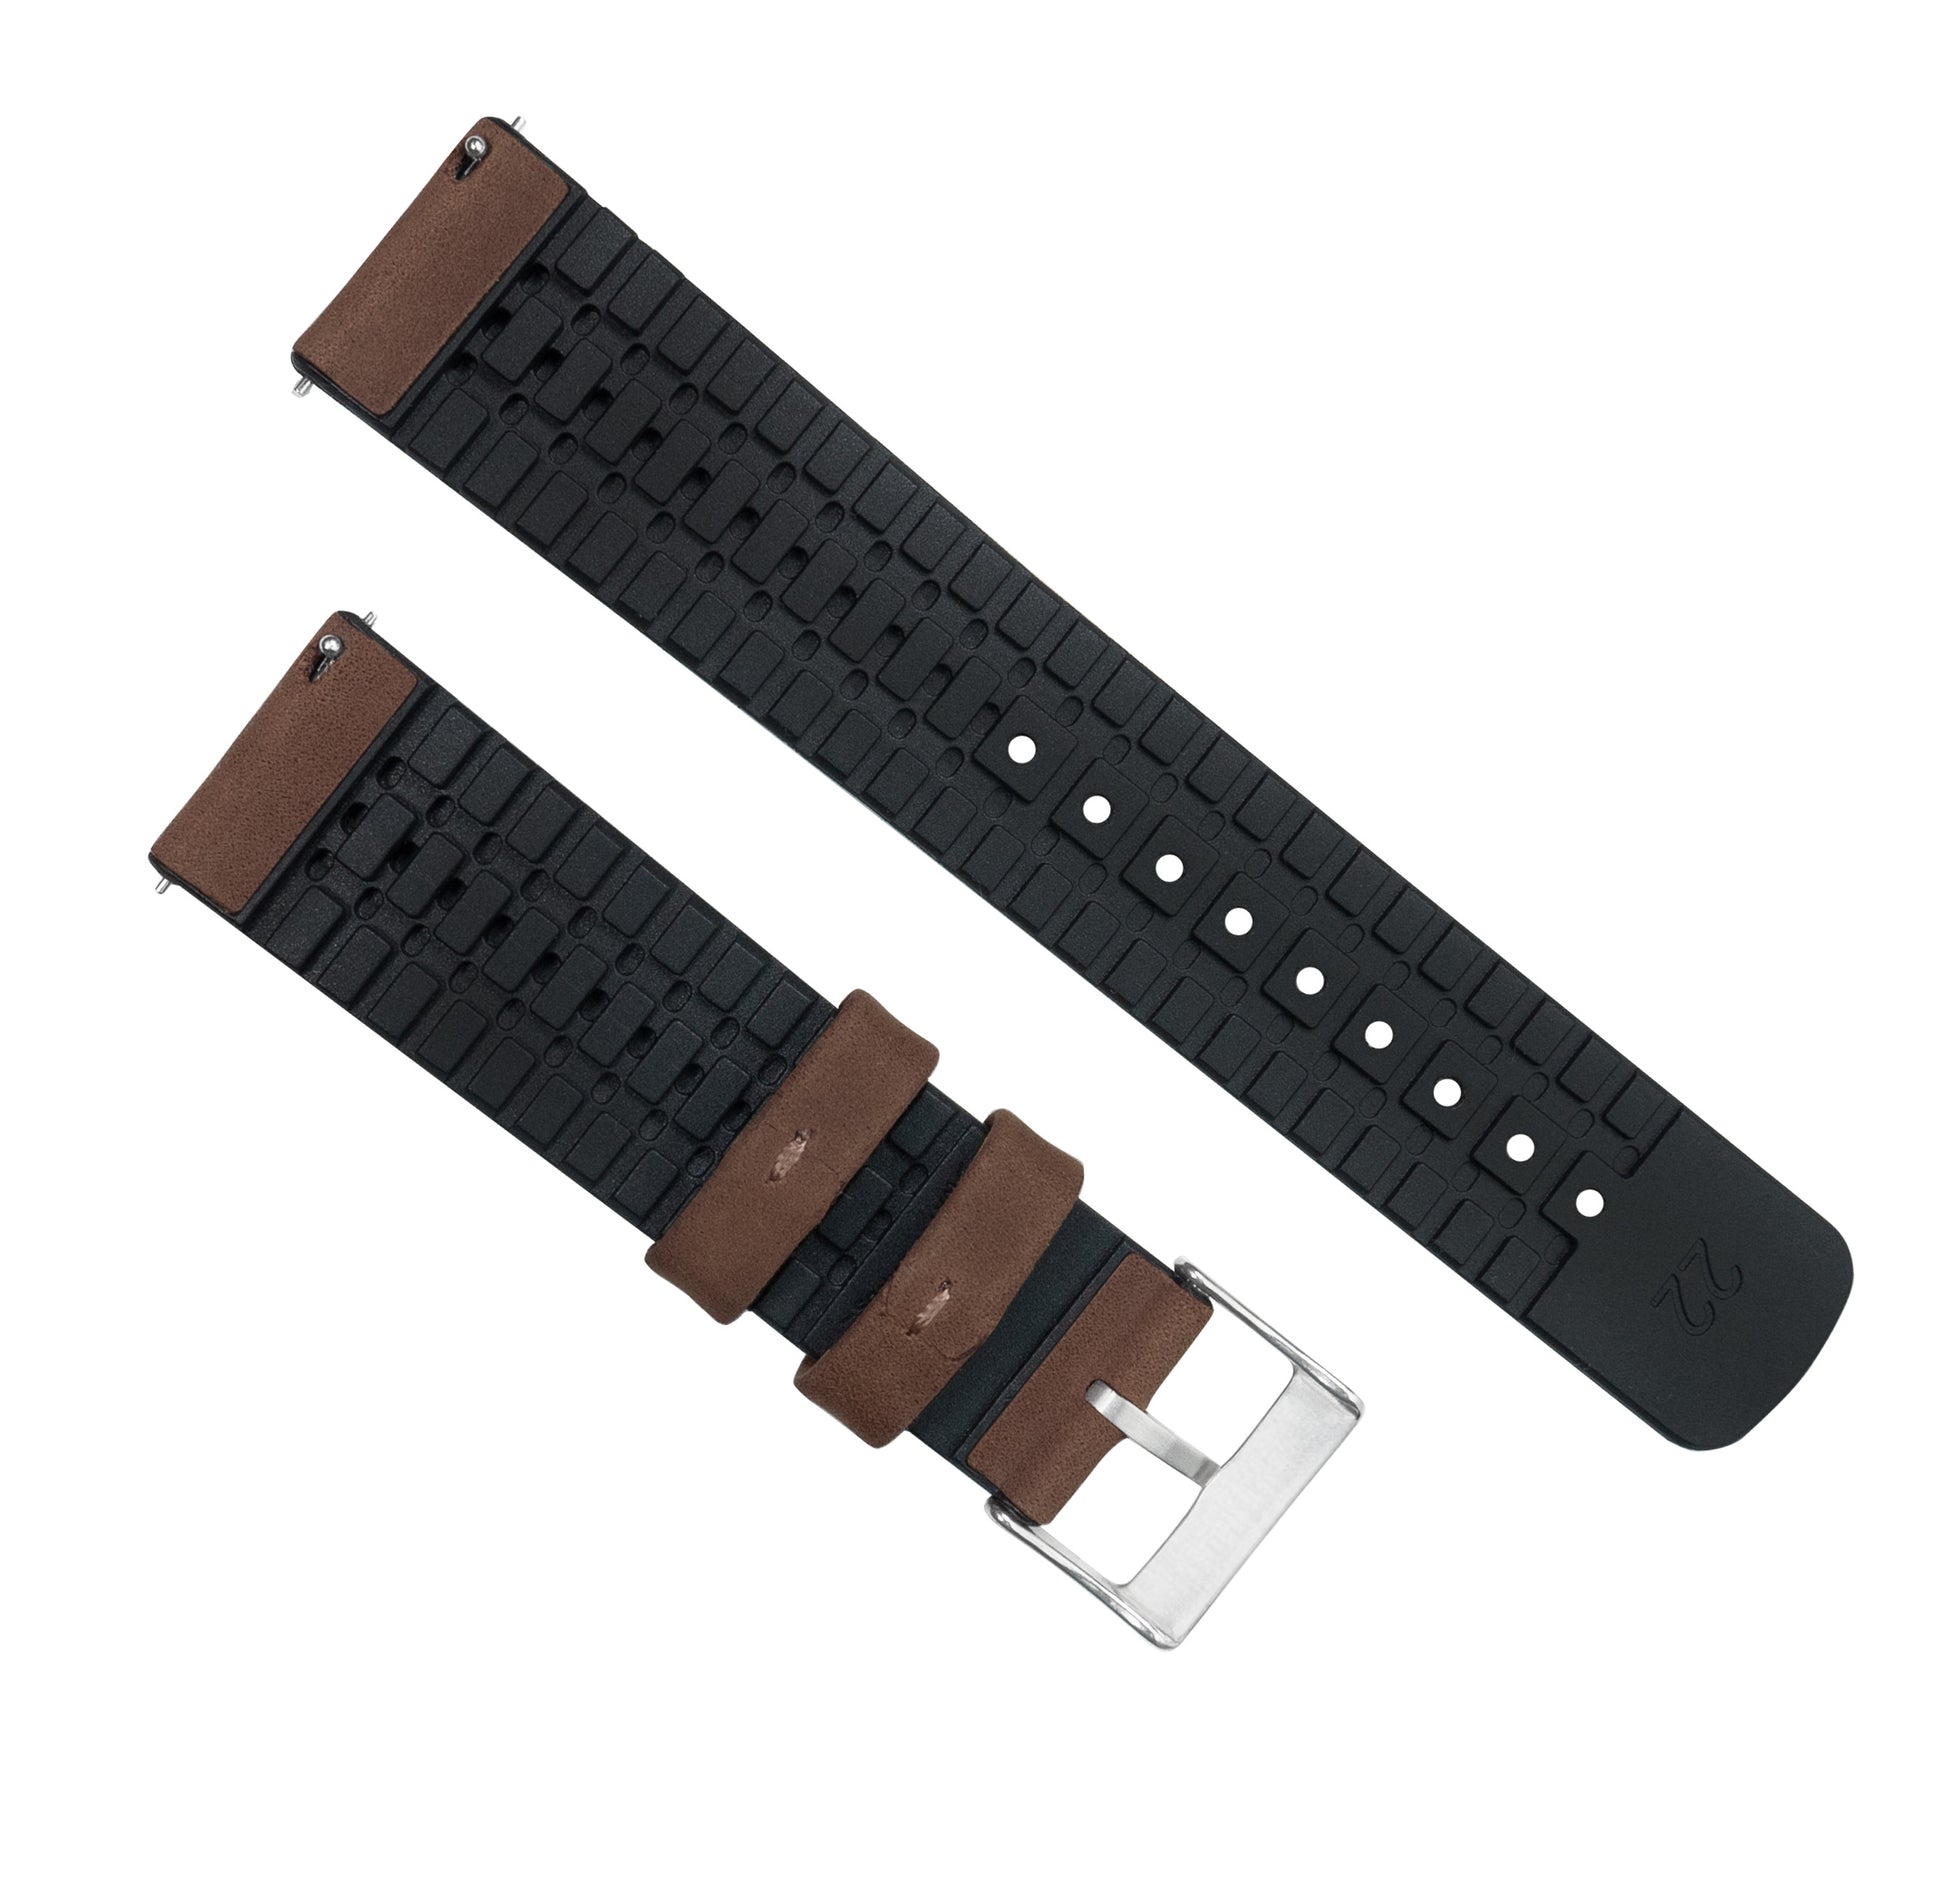 Zenwatch & Zenwatch 2 | Leather and Rubber Hybrid | Walnut Brown - Barton Watch Bands